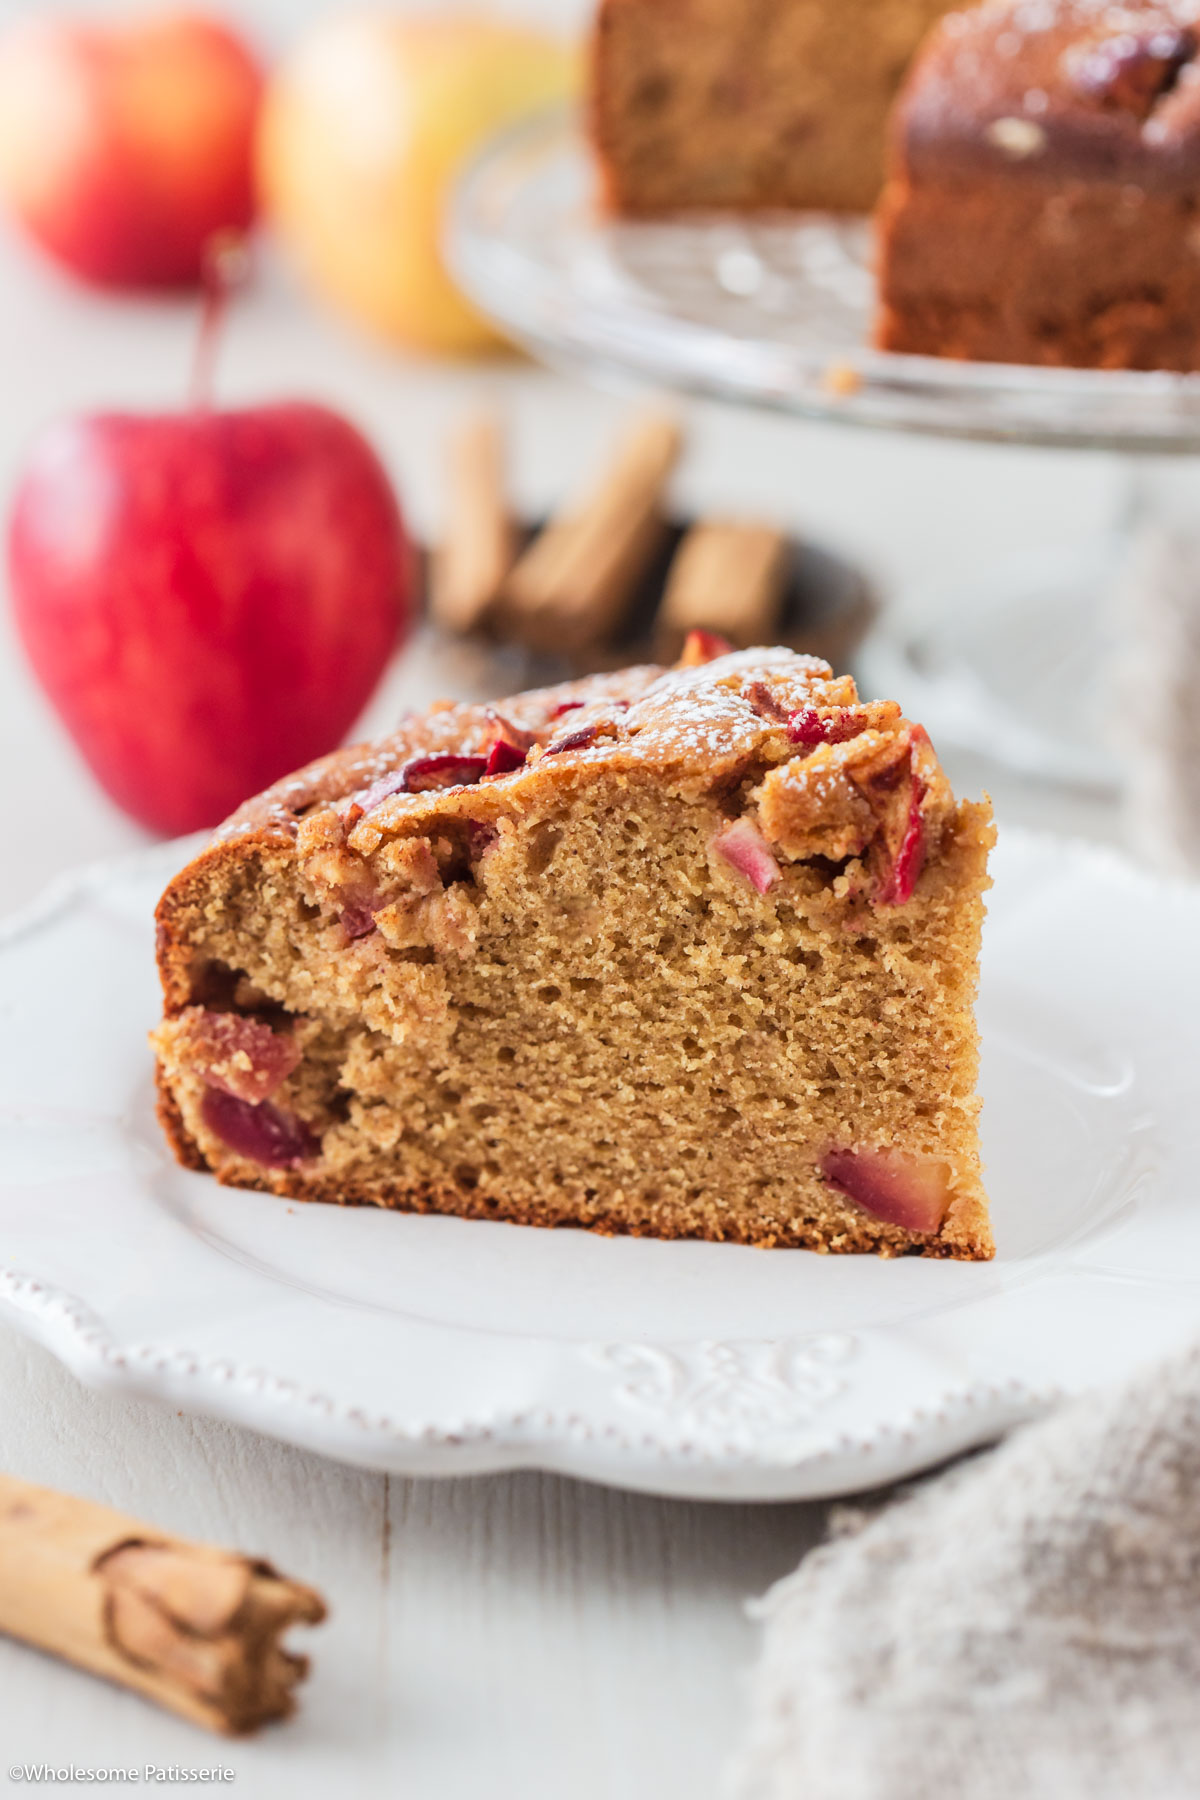 One slice of cinnamon apple cake on white plate with red apple and cinnamon sticks behind.